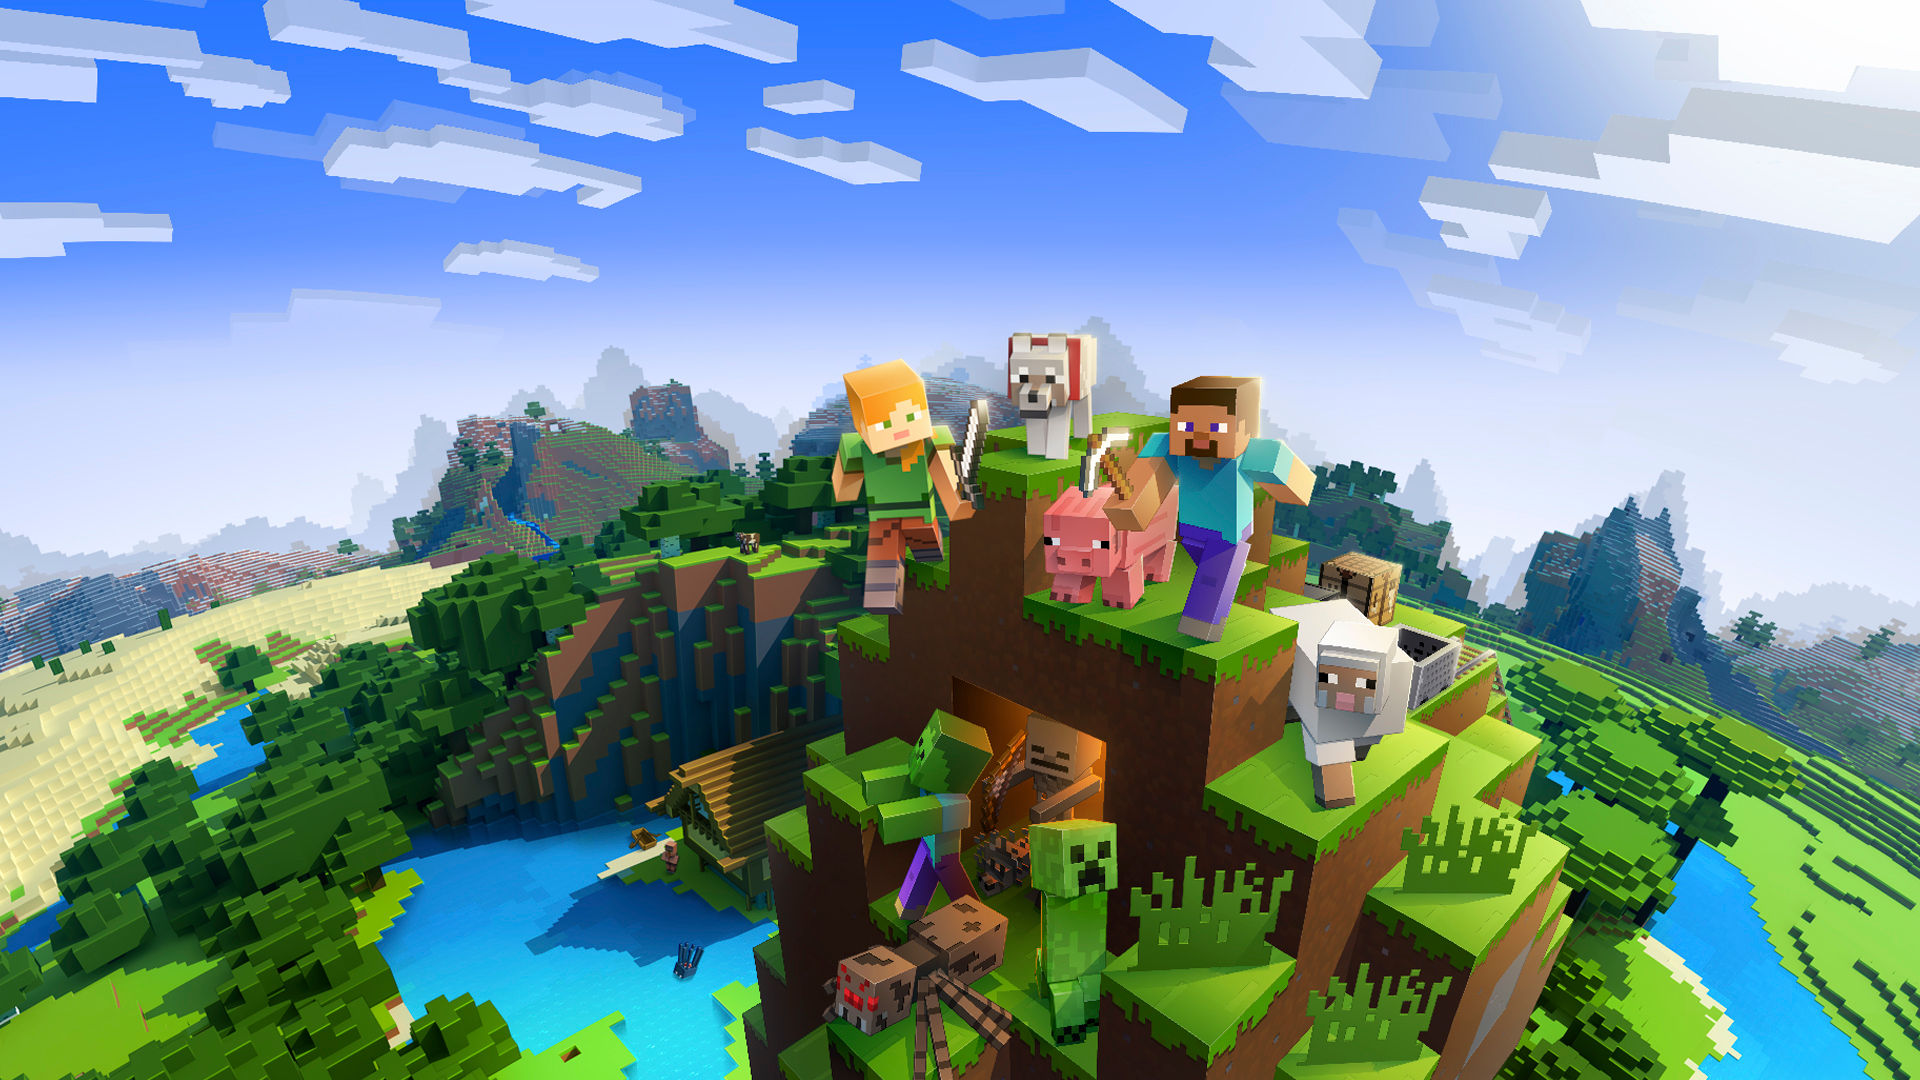 Minecraft mobile PC: how to download and play Minecraft: Pocket